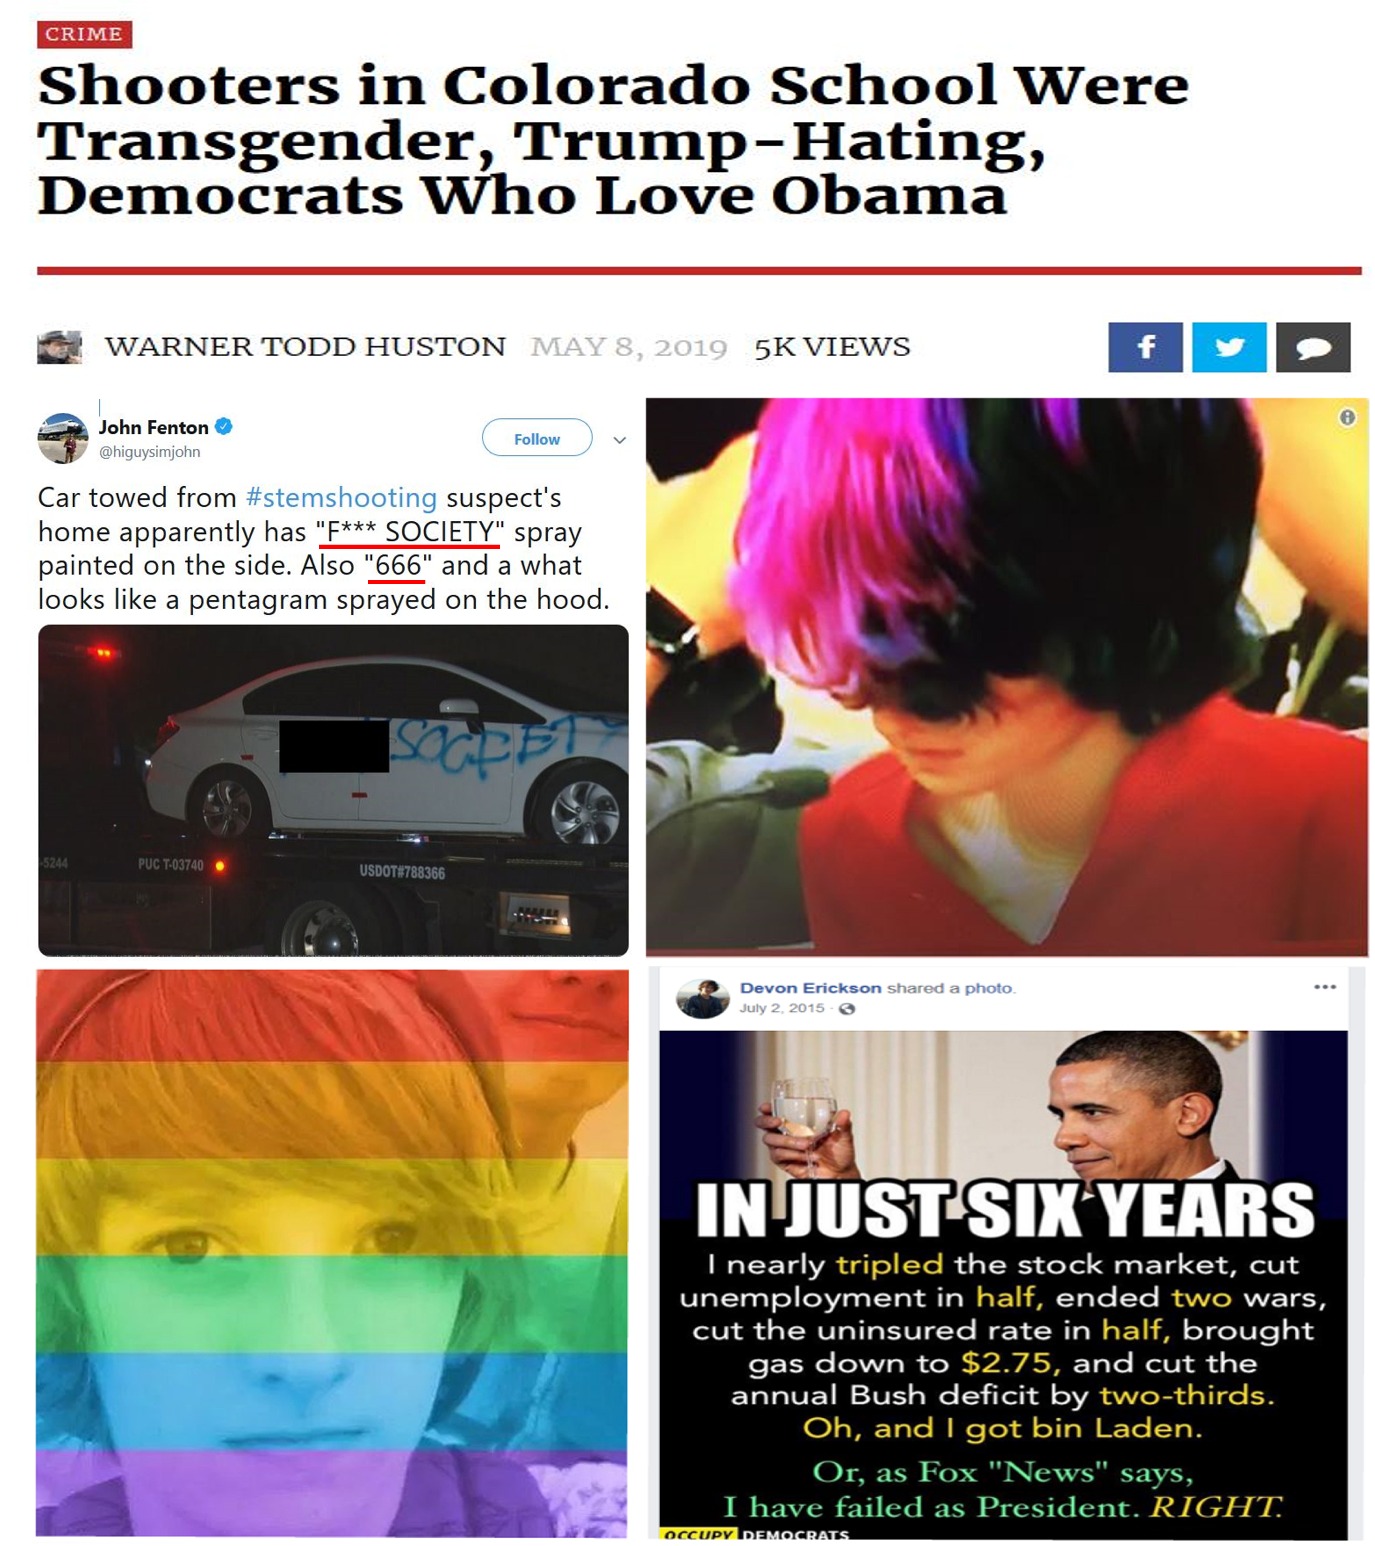 display advertising - Crime Shooters in Colorado School Were Transgender, TrumpHating, Democrats Who Love Obama e Warner Todd Huston Sk Views Funtion Car towed from stemshooting suspect's home apparently has "F Society spray painted on the side. Also "666